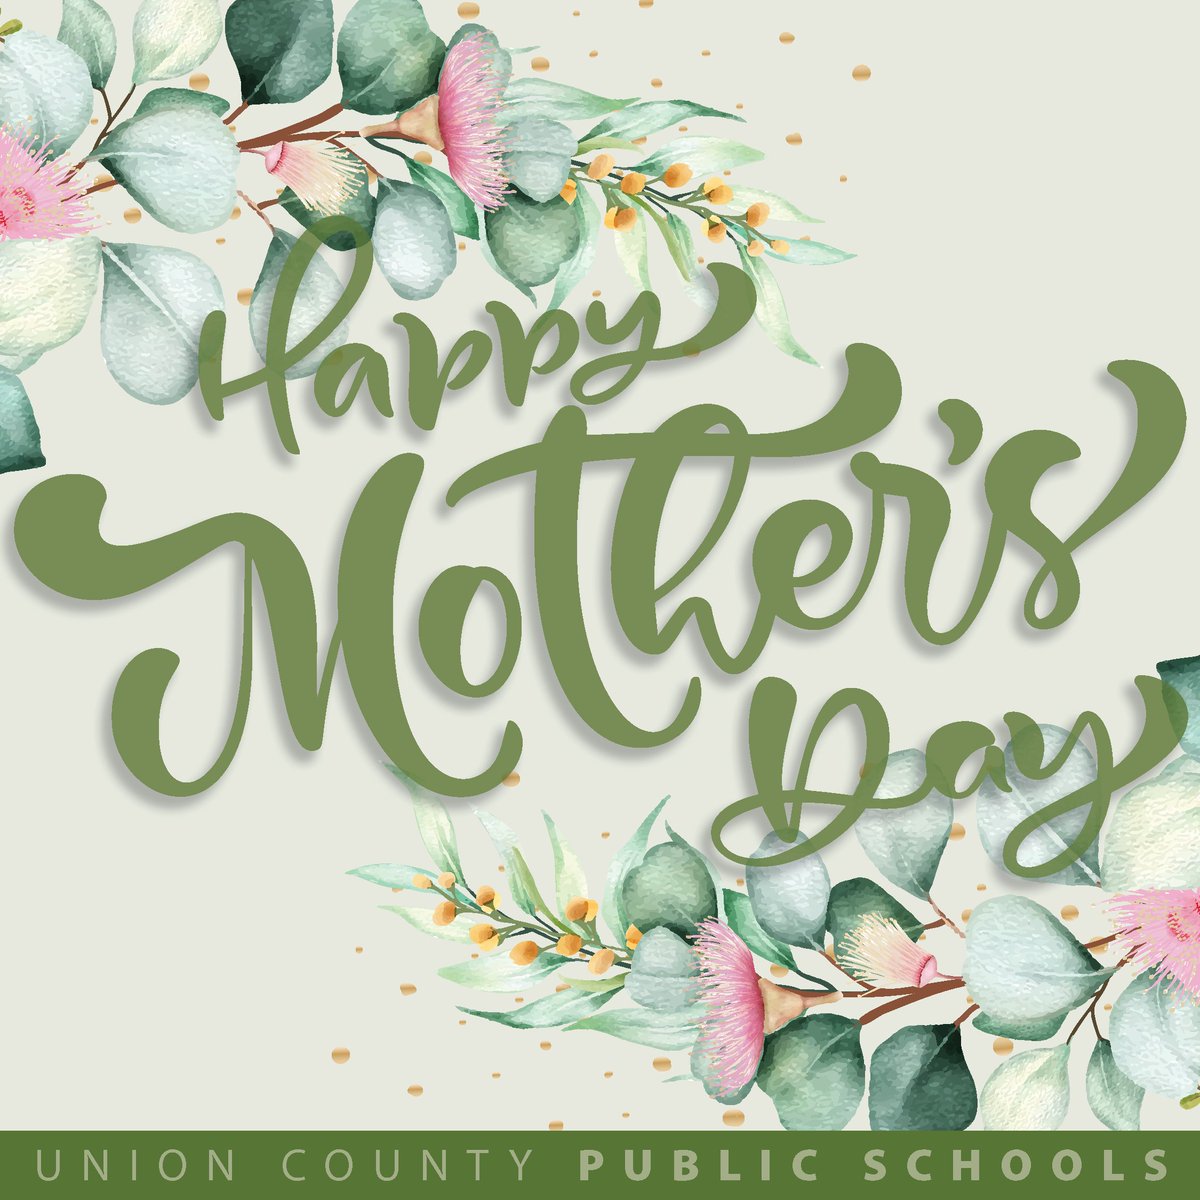 Happy Mother's Day – especially to all of our #TeamUCPS mothers! We hope you enjoy your special day and we are thankful for all you do! @AGHoulihan